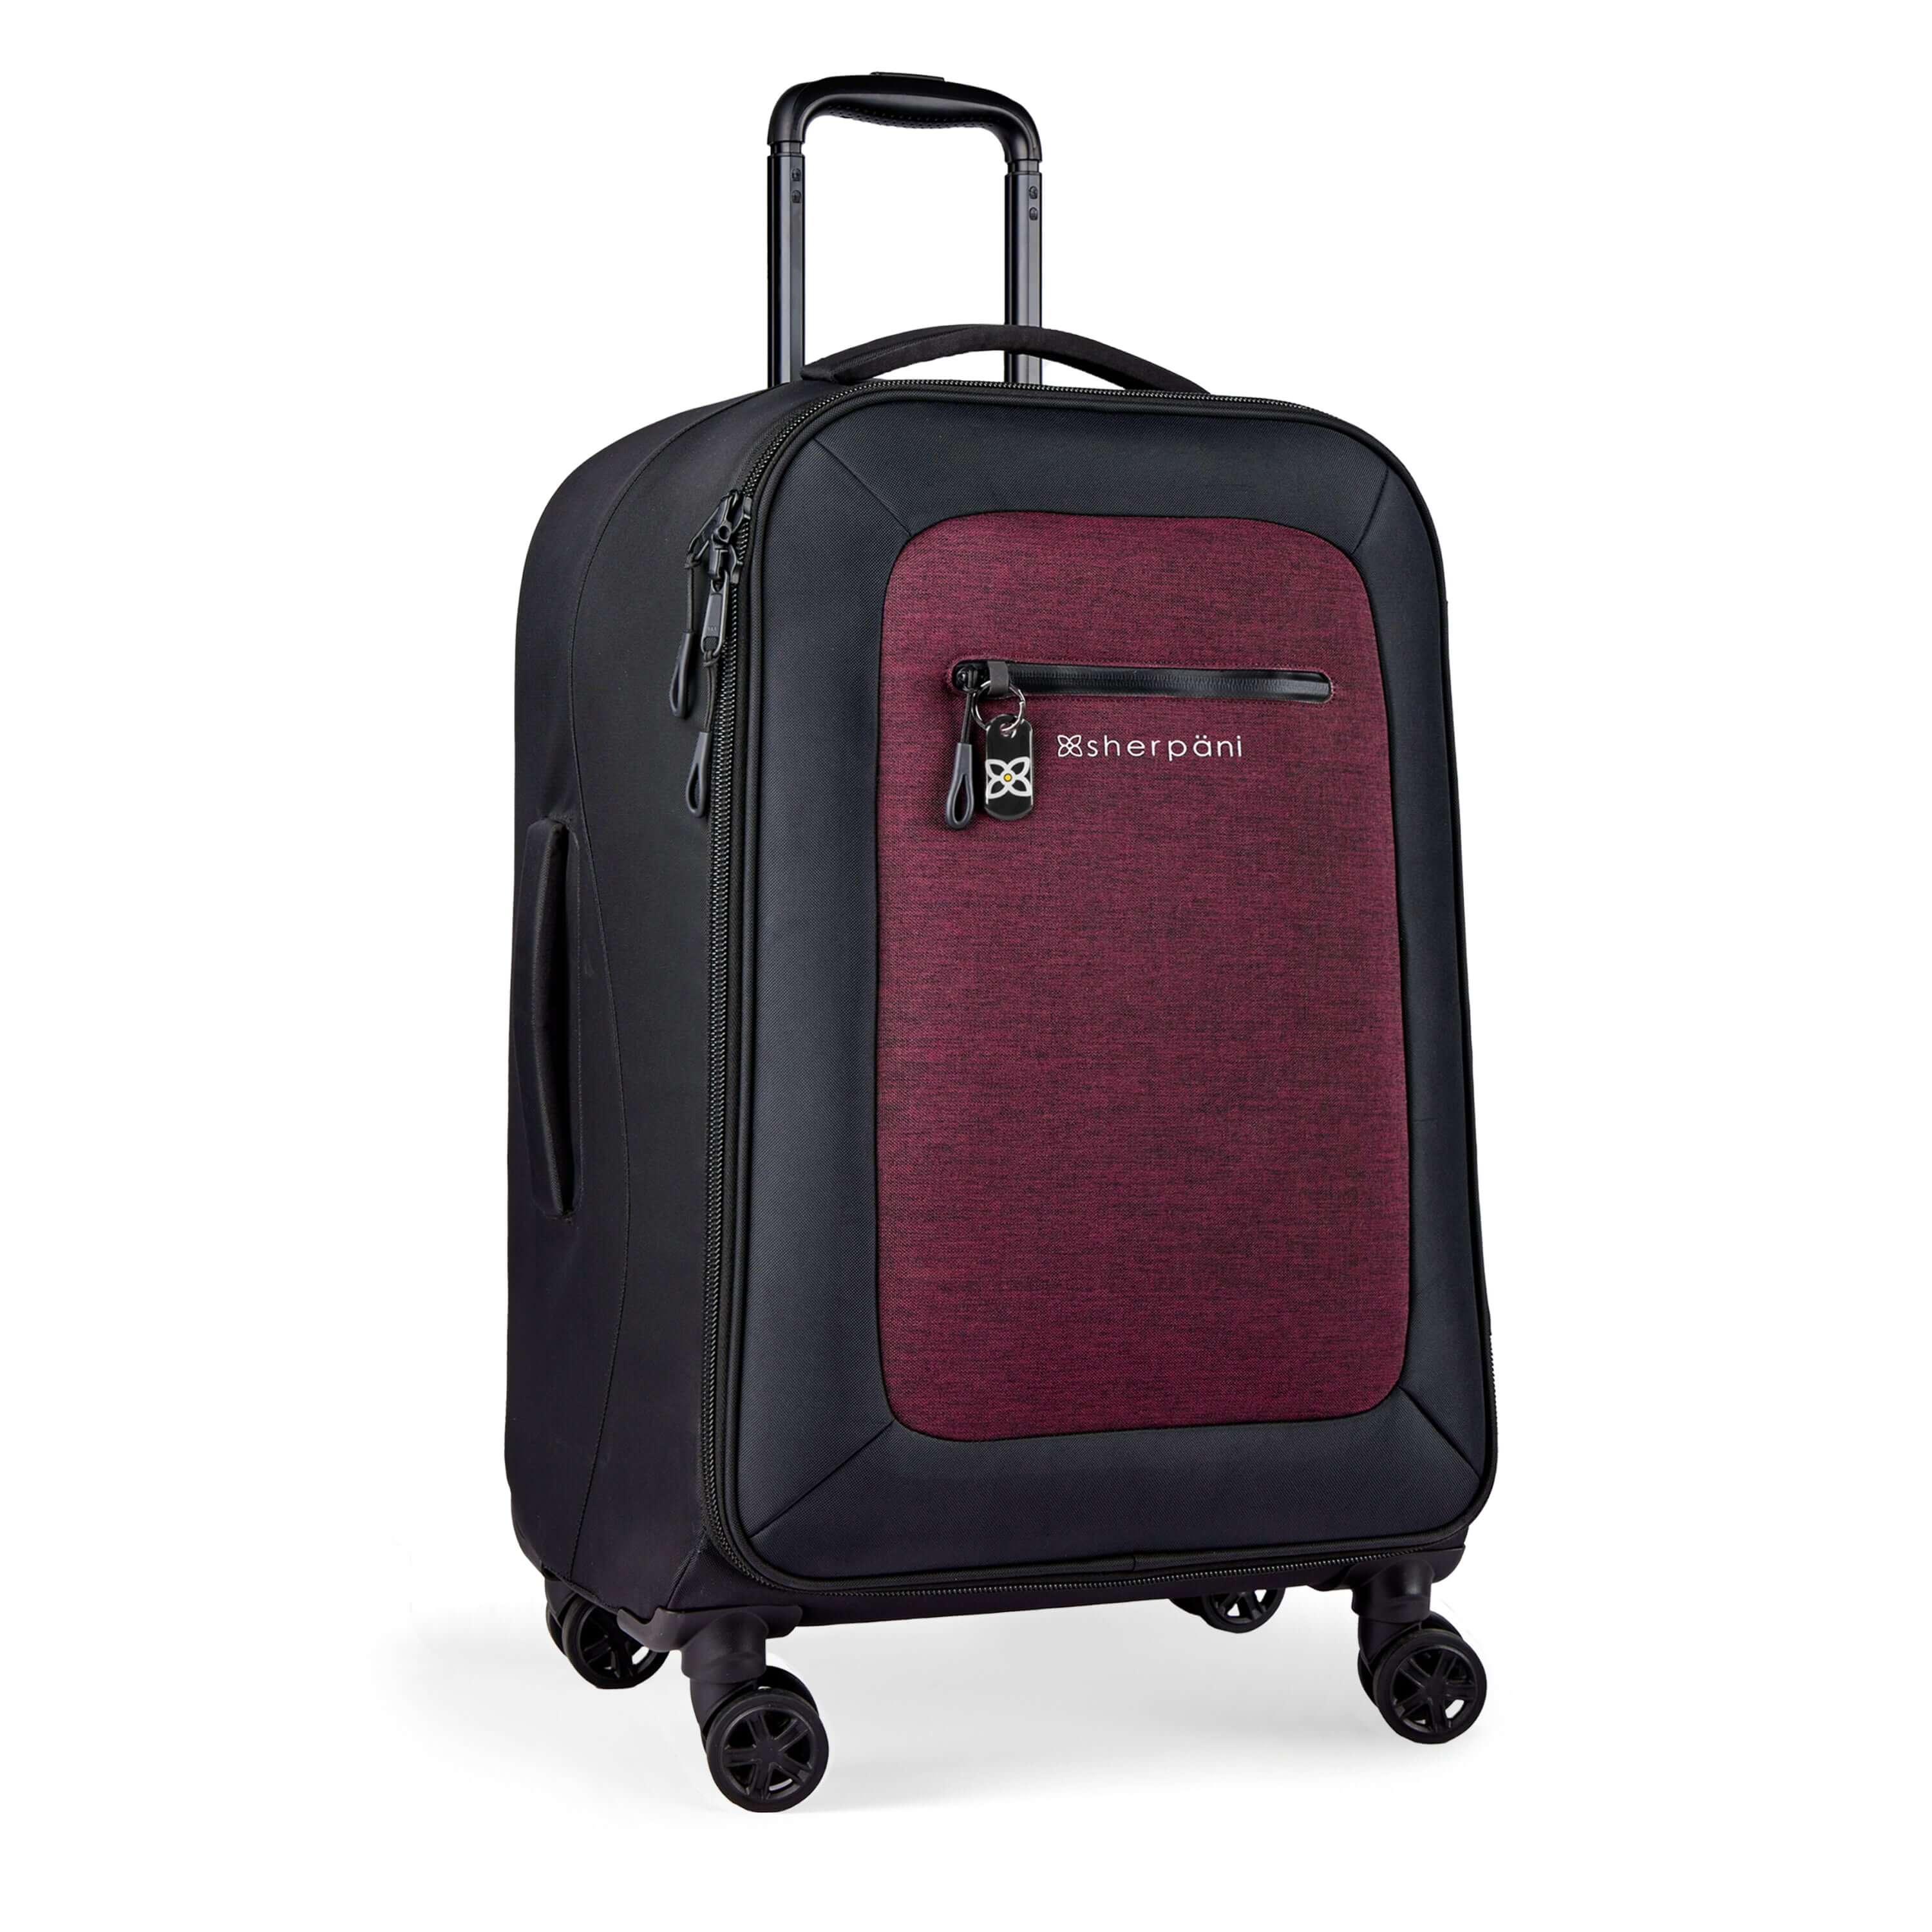 Angled front view of Sherpani’s Anti-Theft luggage the Hemisphere in Merlot. The suitcase has a soft shell exterior made from recycled plastic bottles and features vegan leather accents in black. There is a main zipper compartment and an external pocket on the front with a locking zipper and a ReturnMe tag. On the top of the suitcase sits a retractable luggage handle. On the top and side sit two easy-access handles. At the bottom are four 36-degree spinner wheels for smooth rolling. 